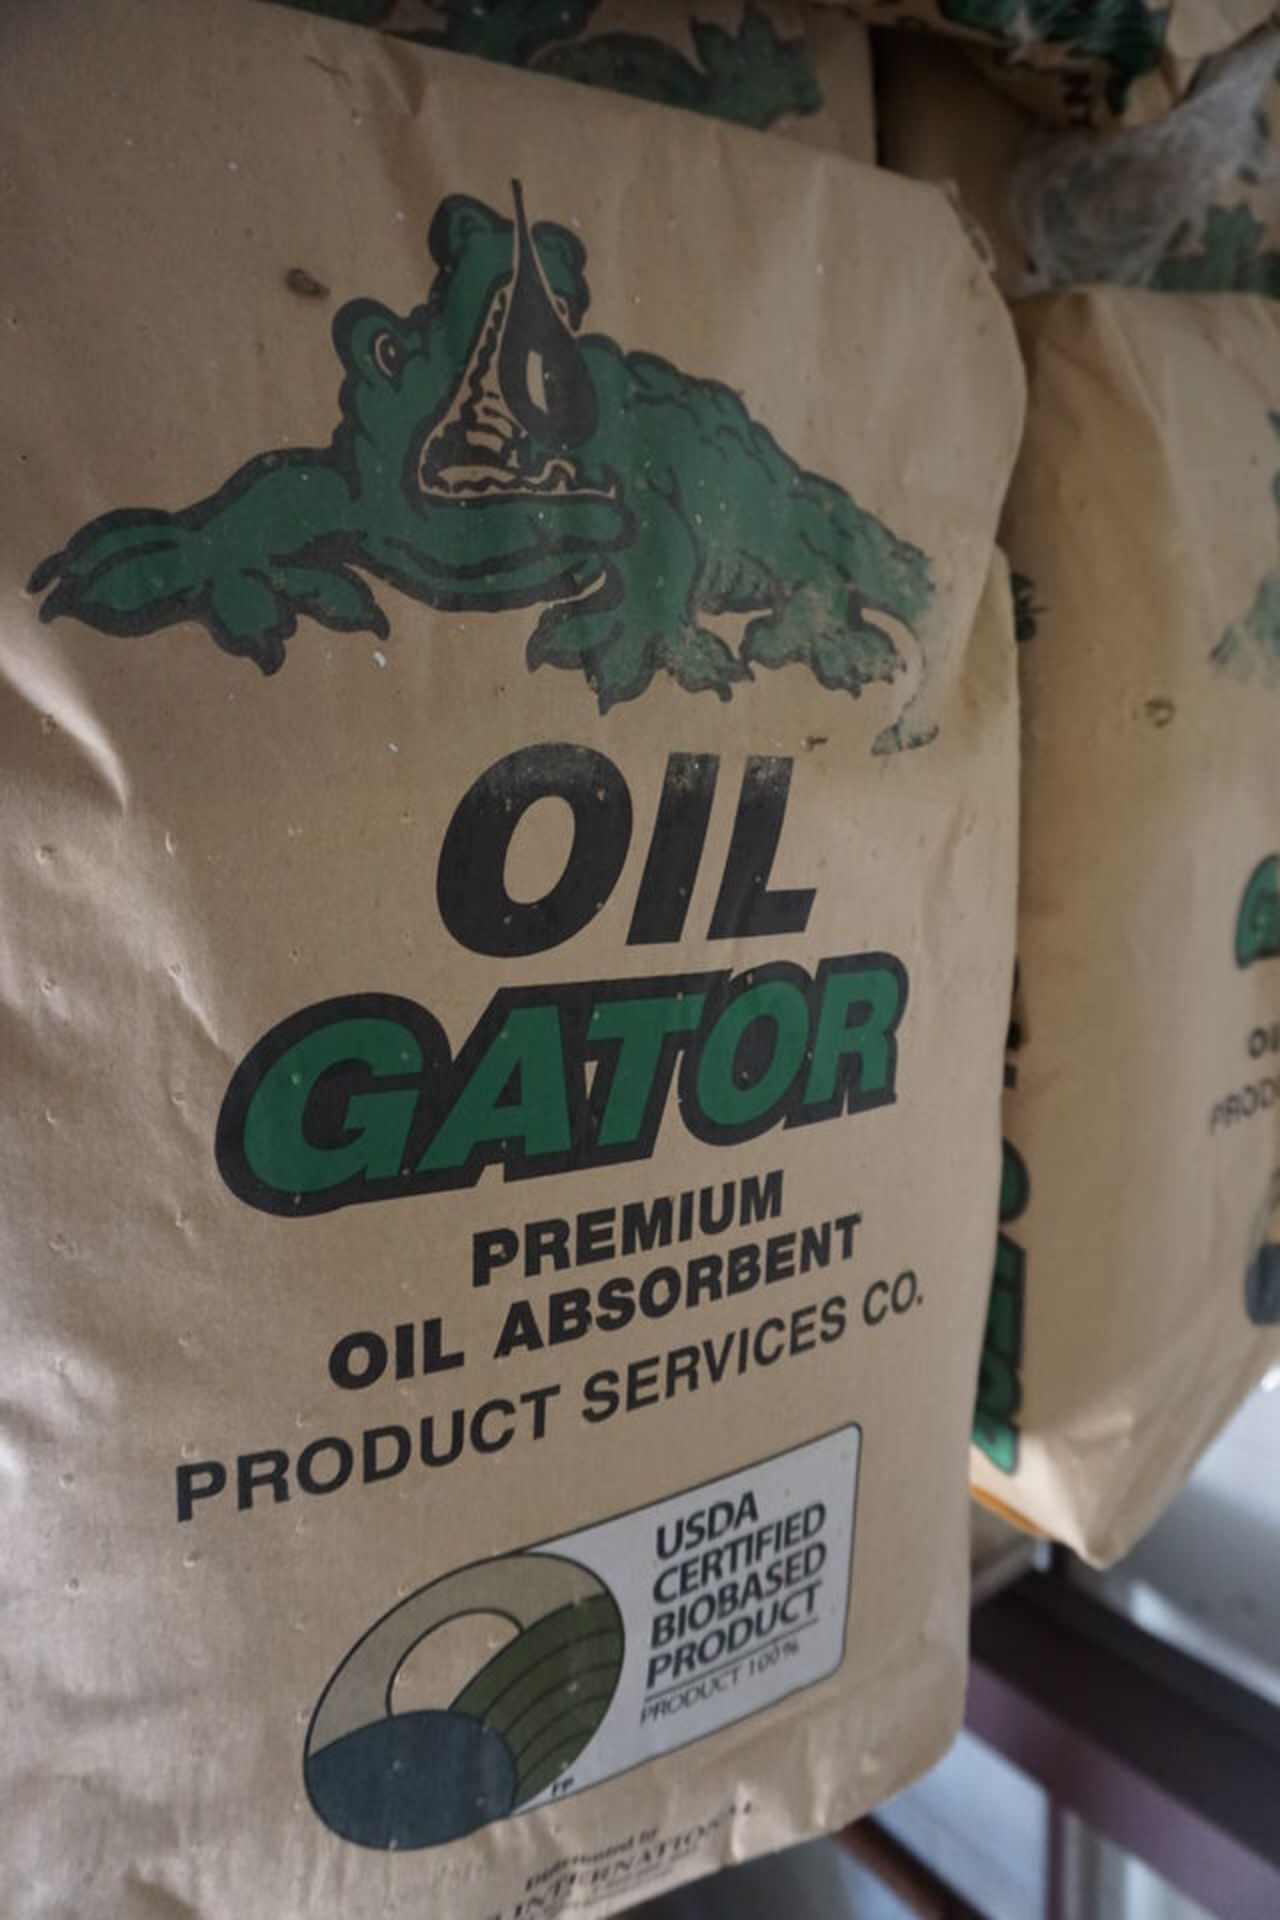 GATOR PREMIUM OIL ABSORBENT APPROX 34 40 LB BAGS - Image 2 of 2